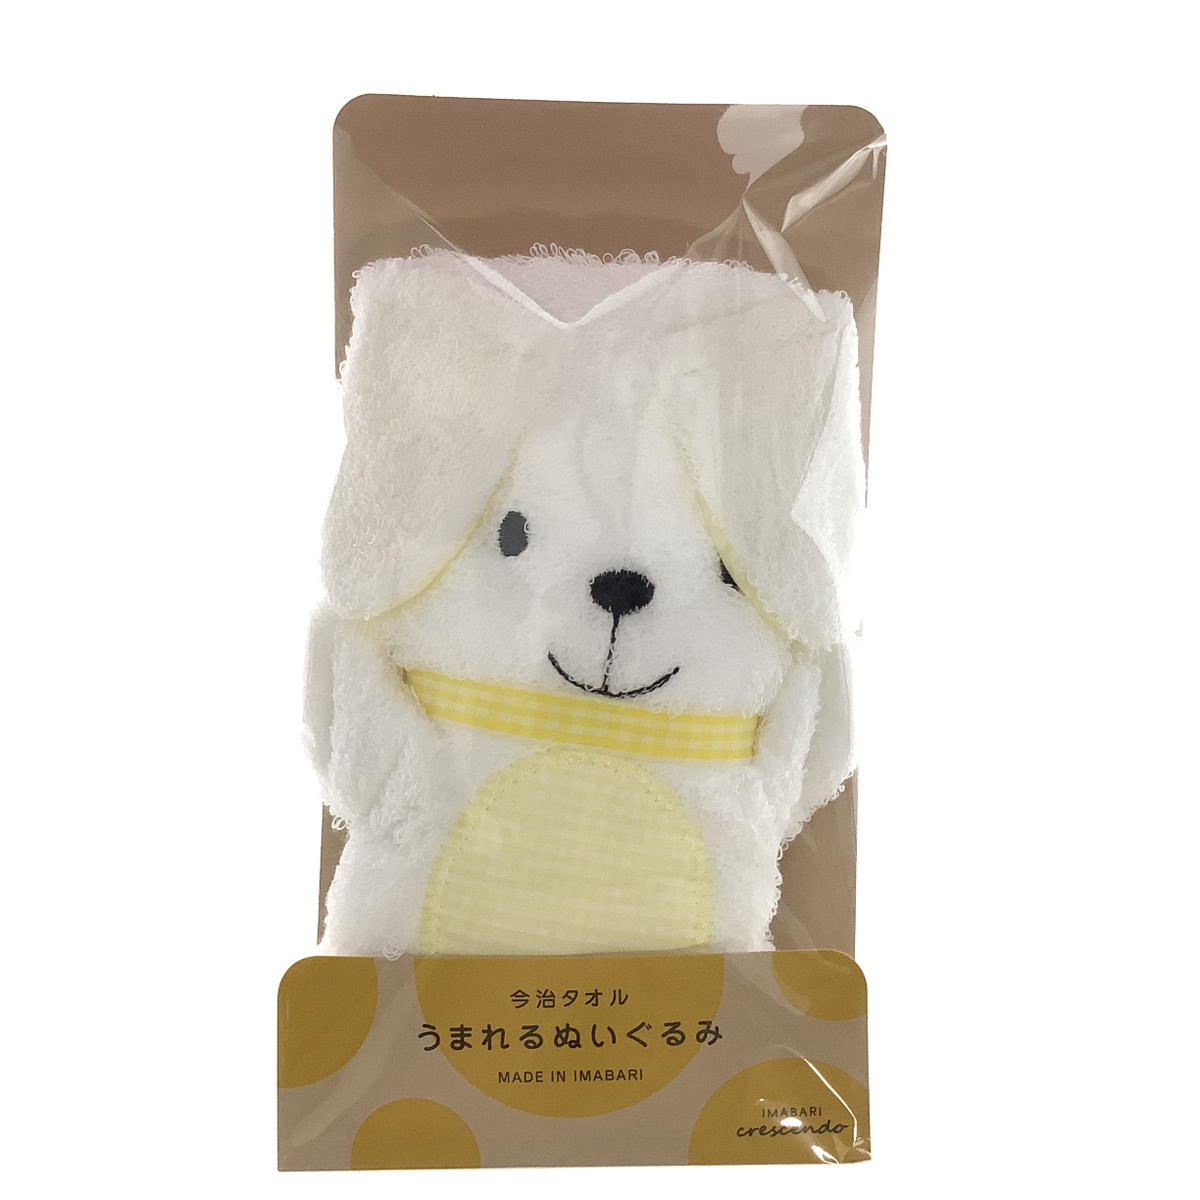 u... soft toy woshu towel white now . towel [ new goods * free shipping ] cotton 100% made in Japan * now . production baby baby soft toy 